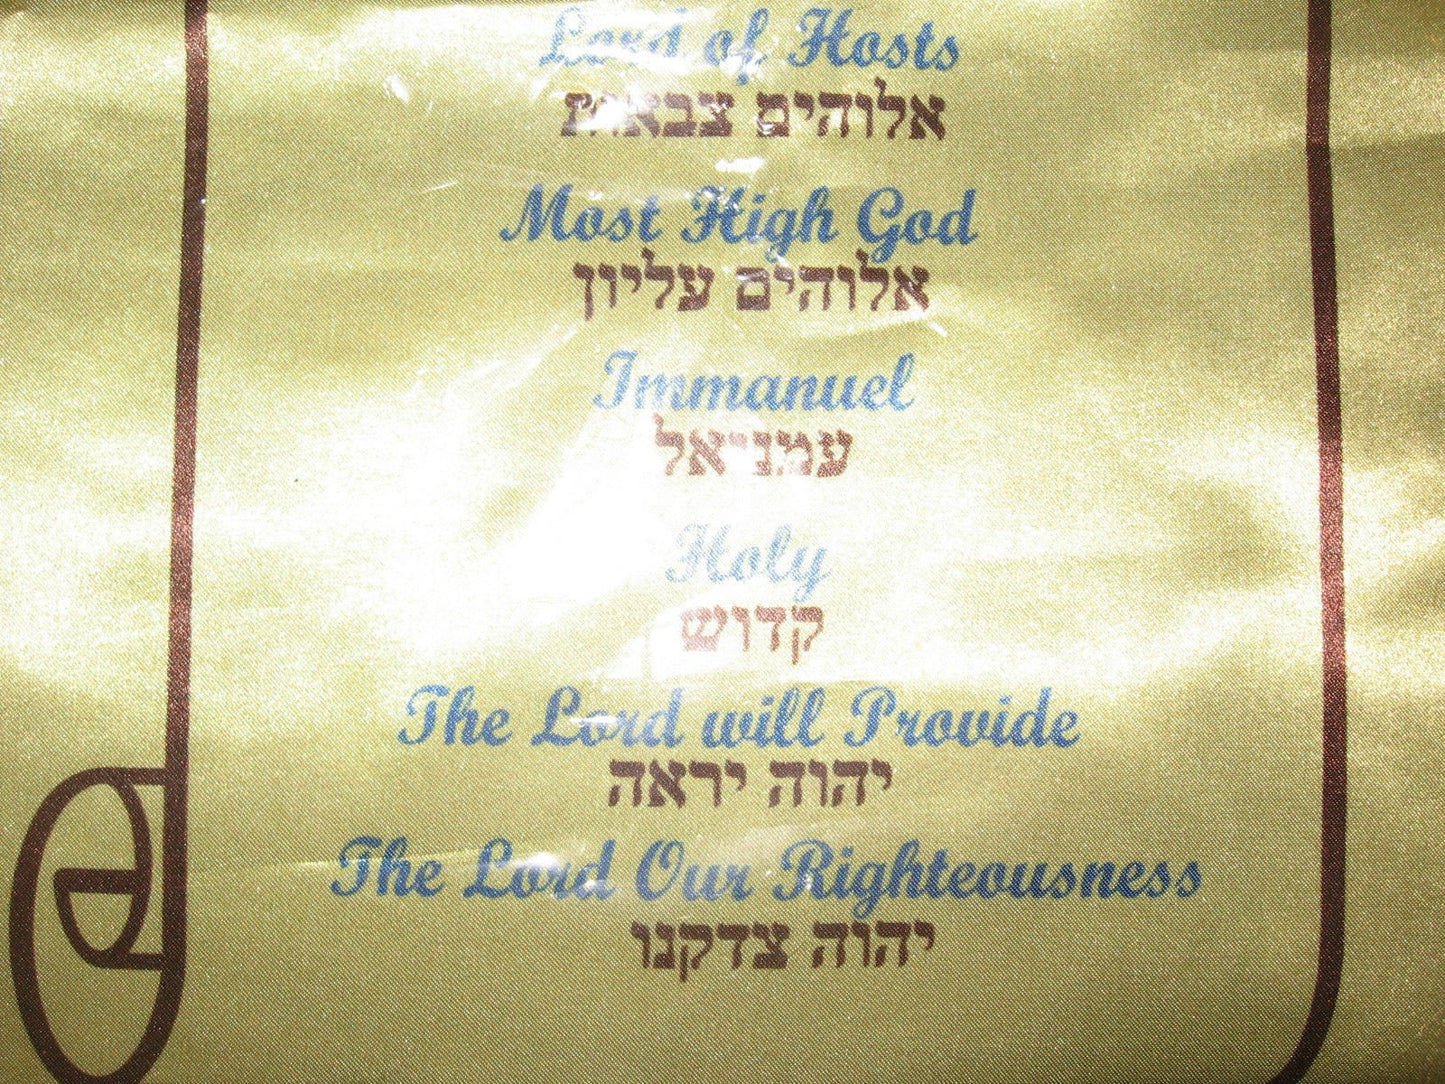 Names of God in Hebrew banner - small - Rock of Israel 